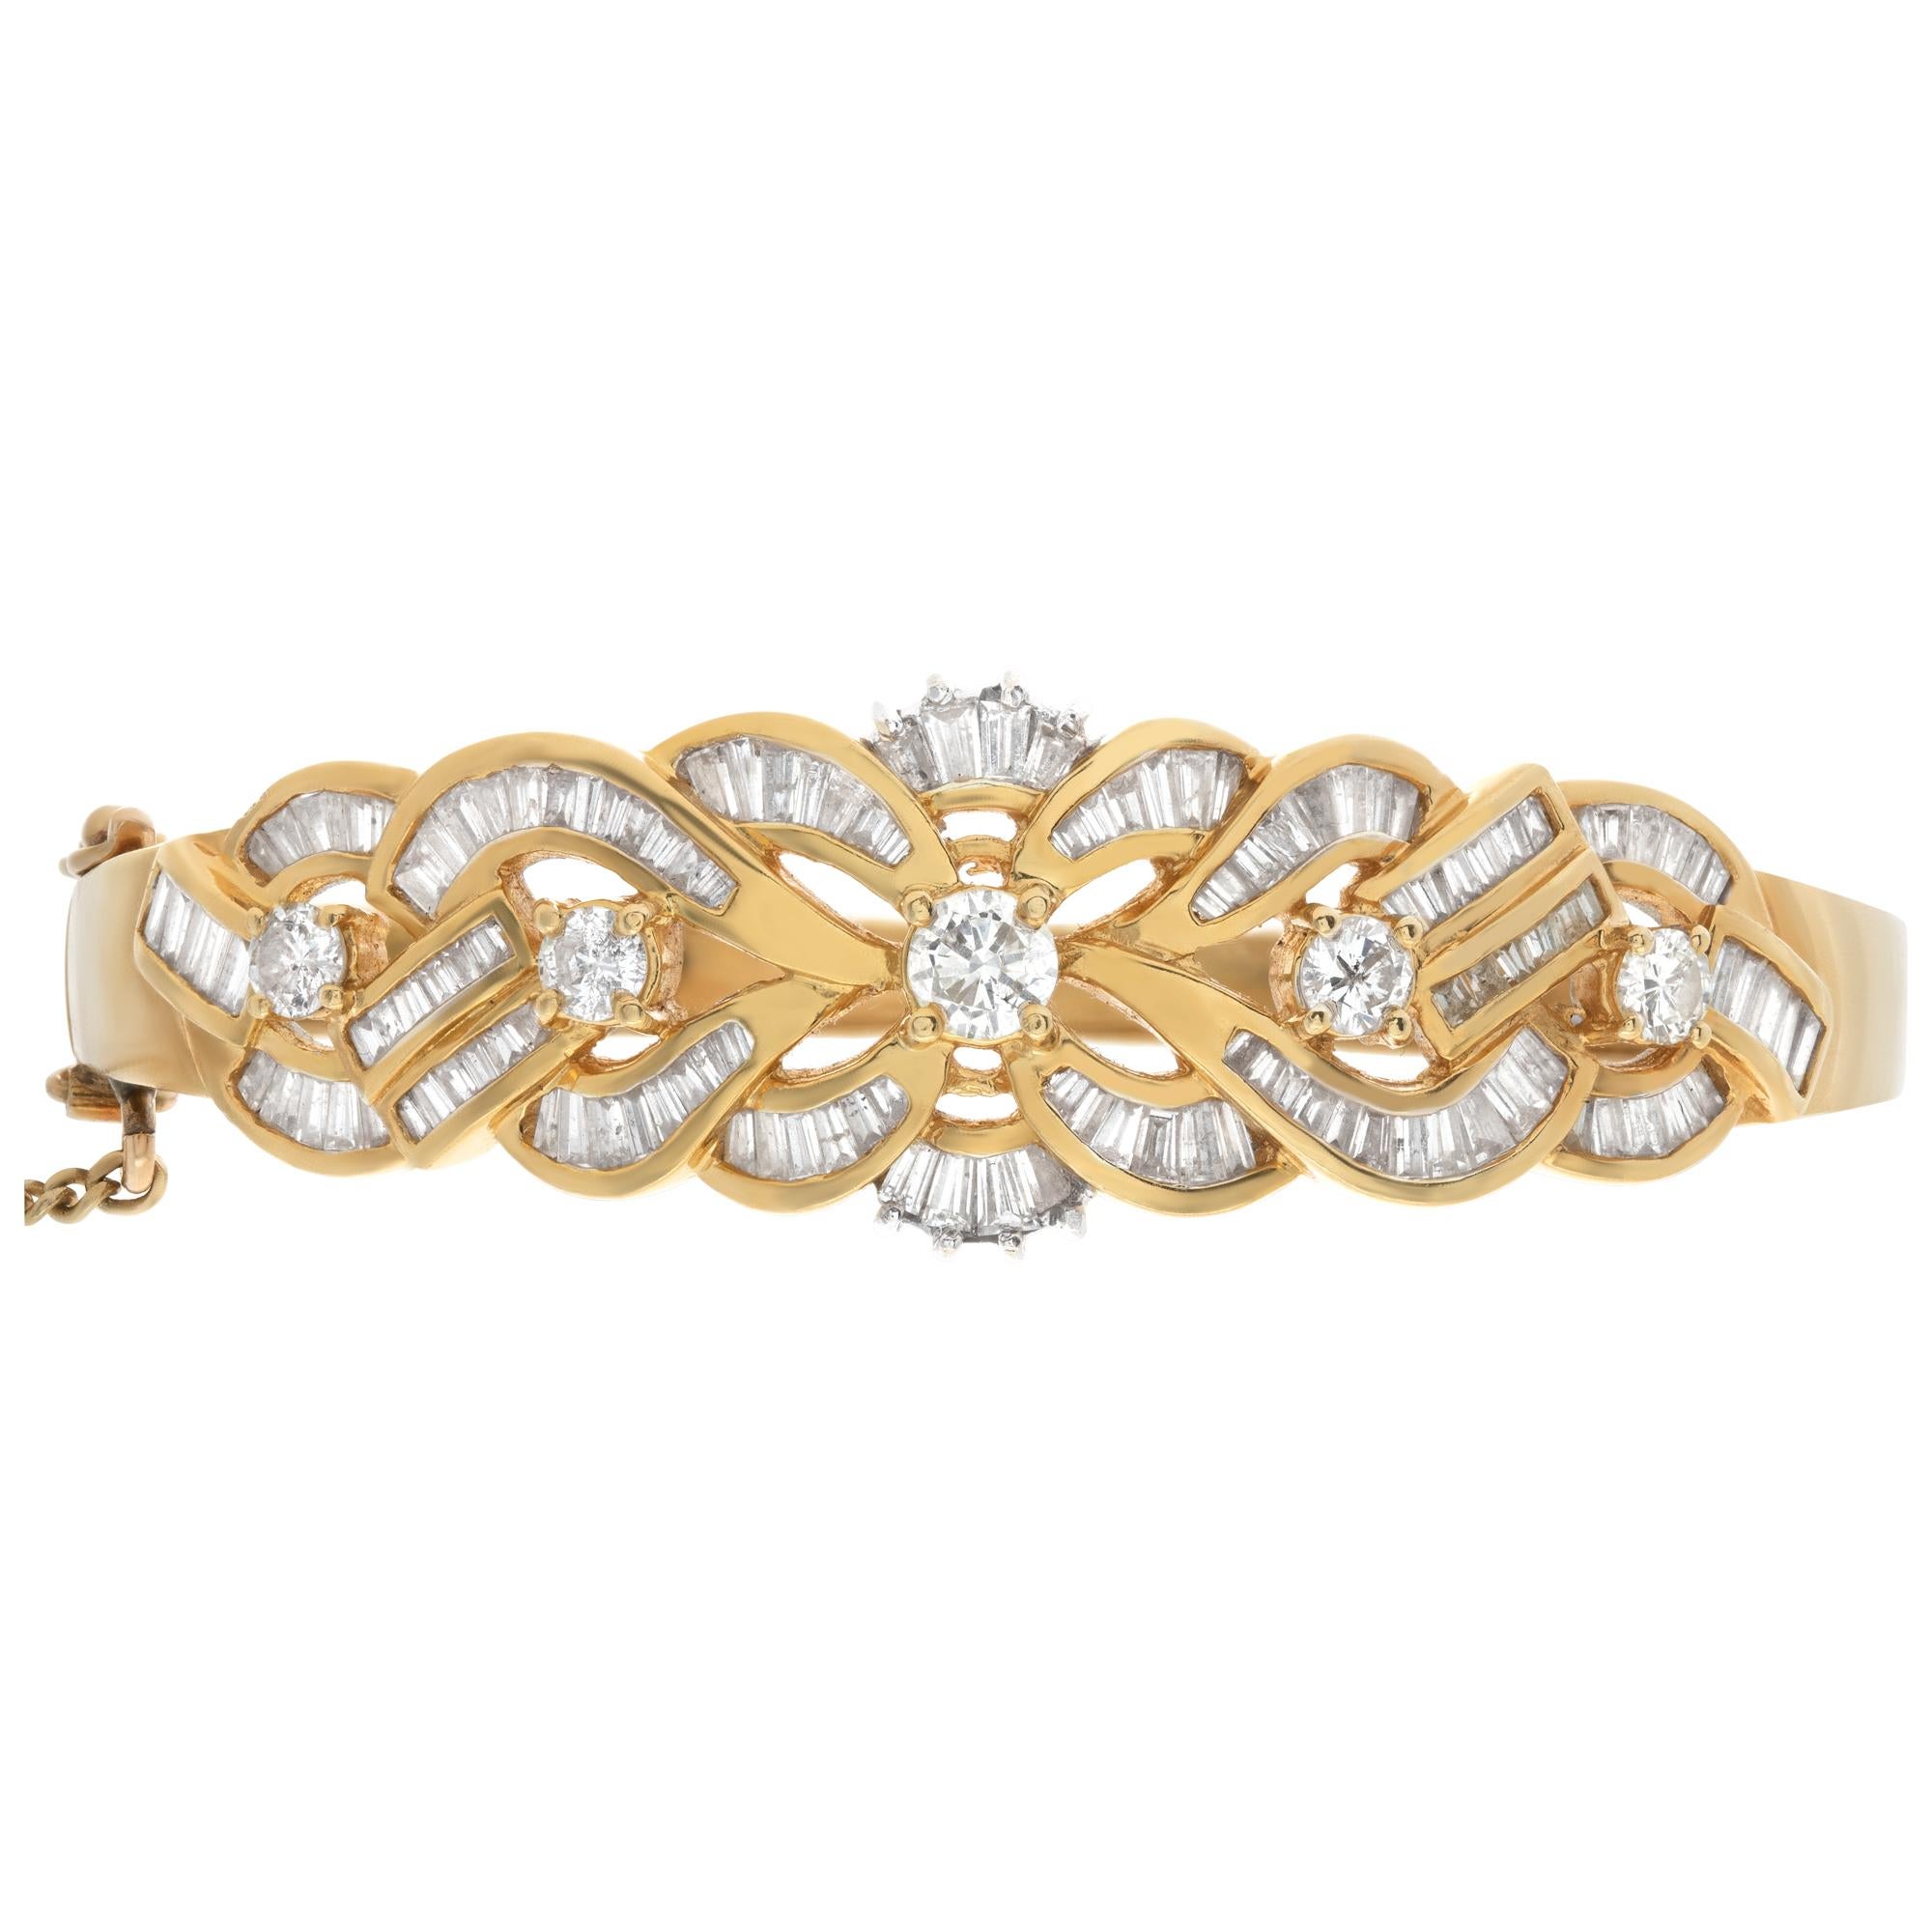 Diamond hinged bangle set in 18k yellow gold. Approx 3 carats of full round brilliant and baguette cut diamonds. G-H color, S1 clarity. Box clasp with dounble security latches and security chain. Fits wrist up to 6.75 inches